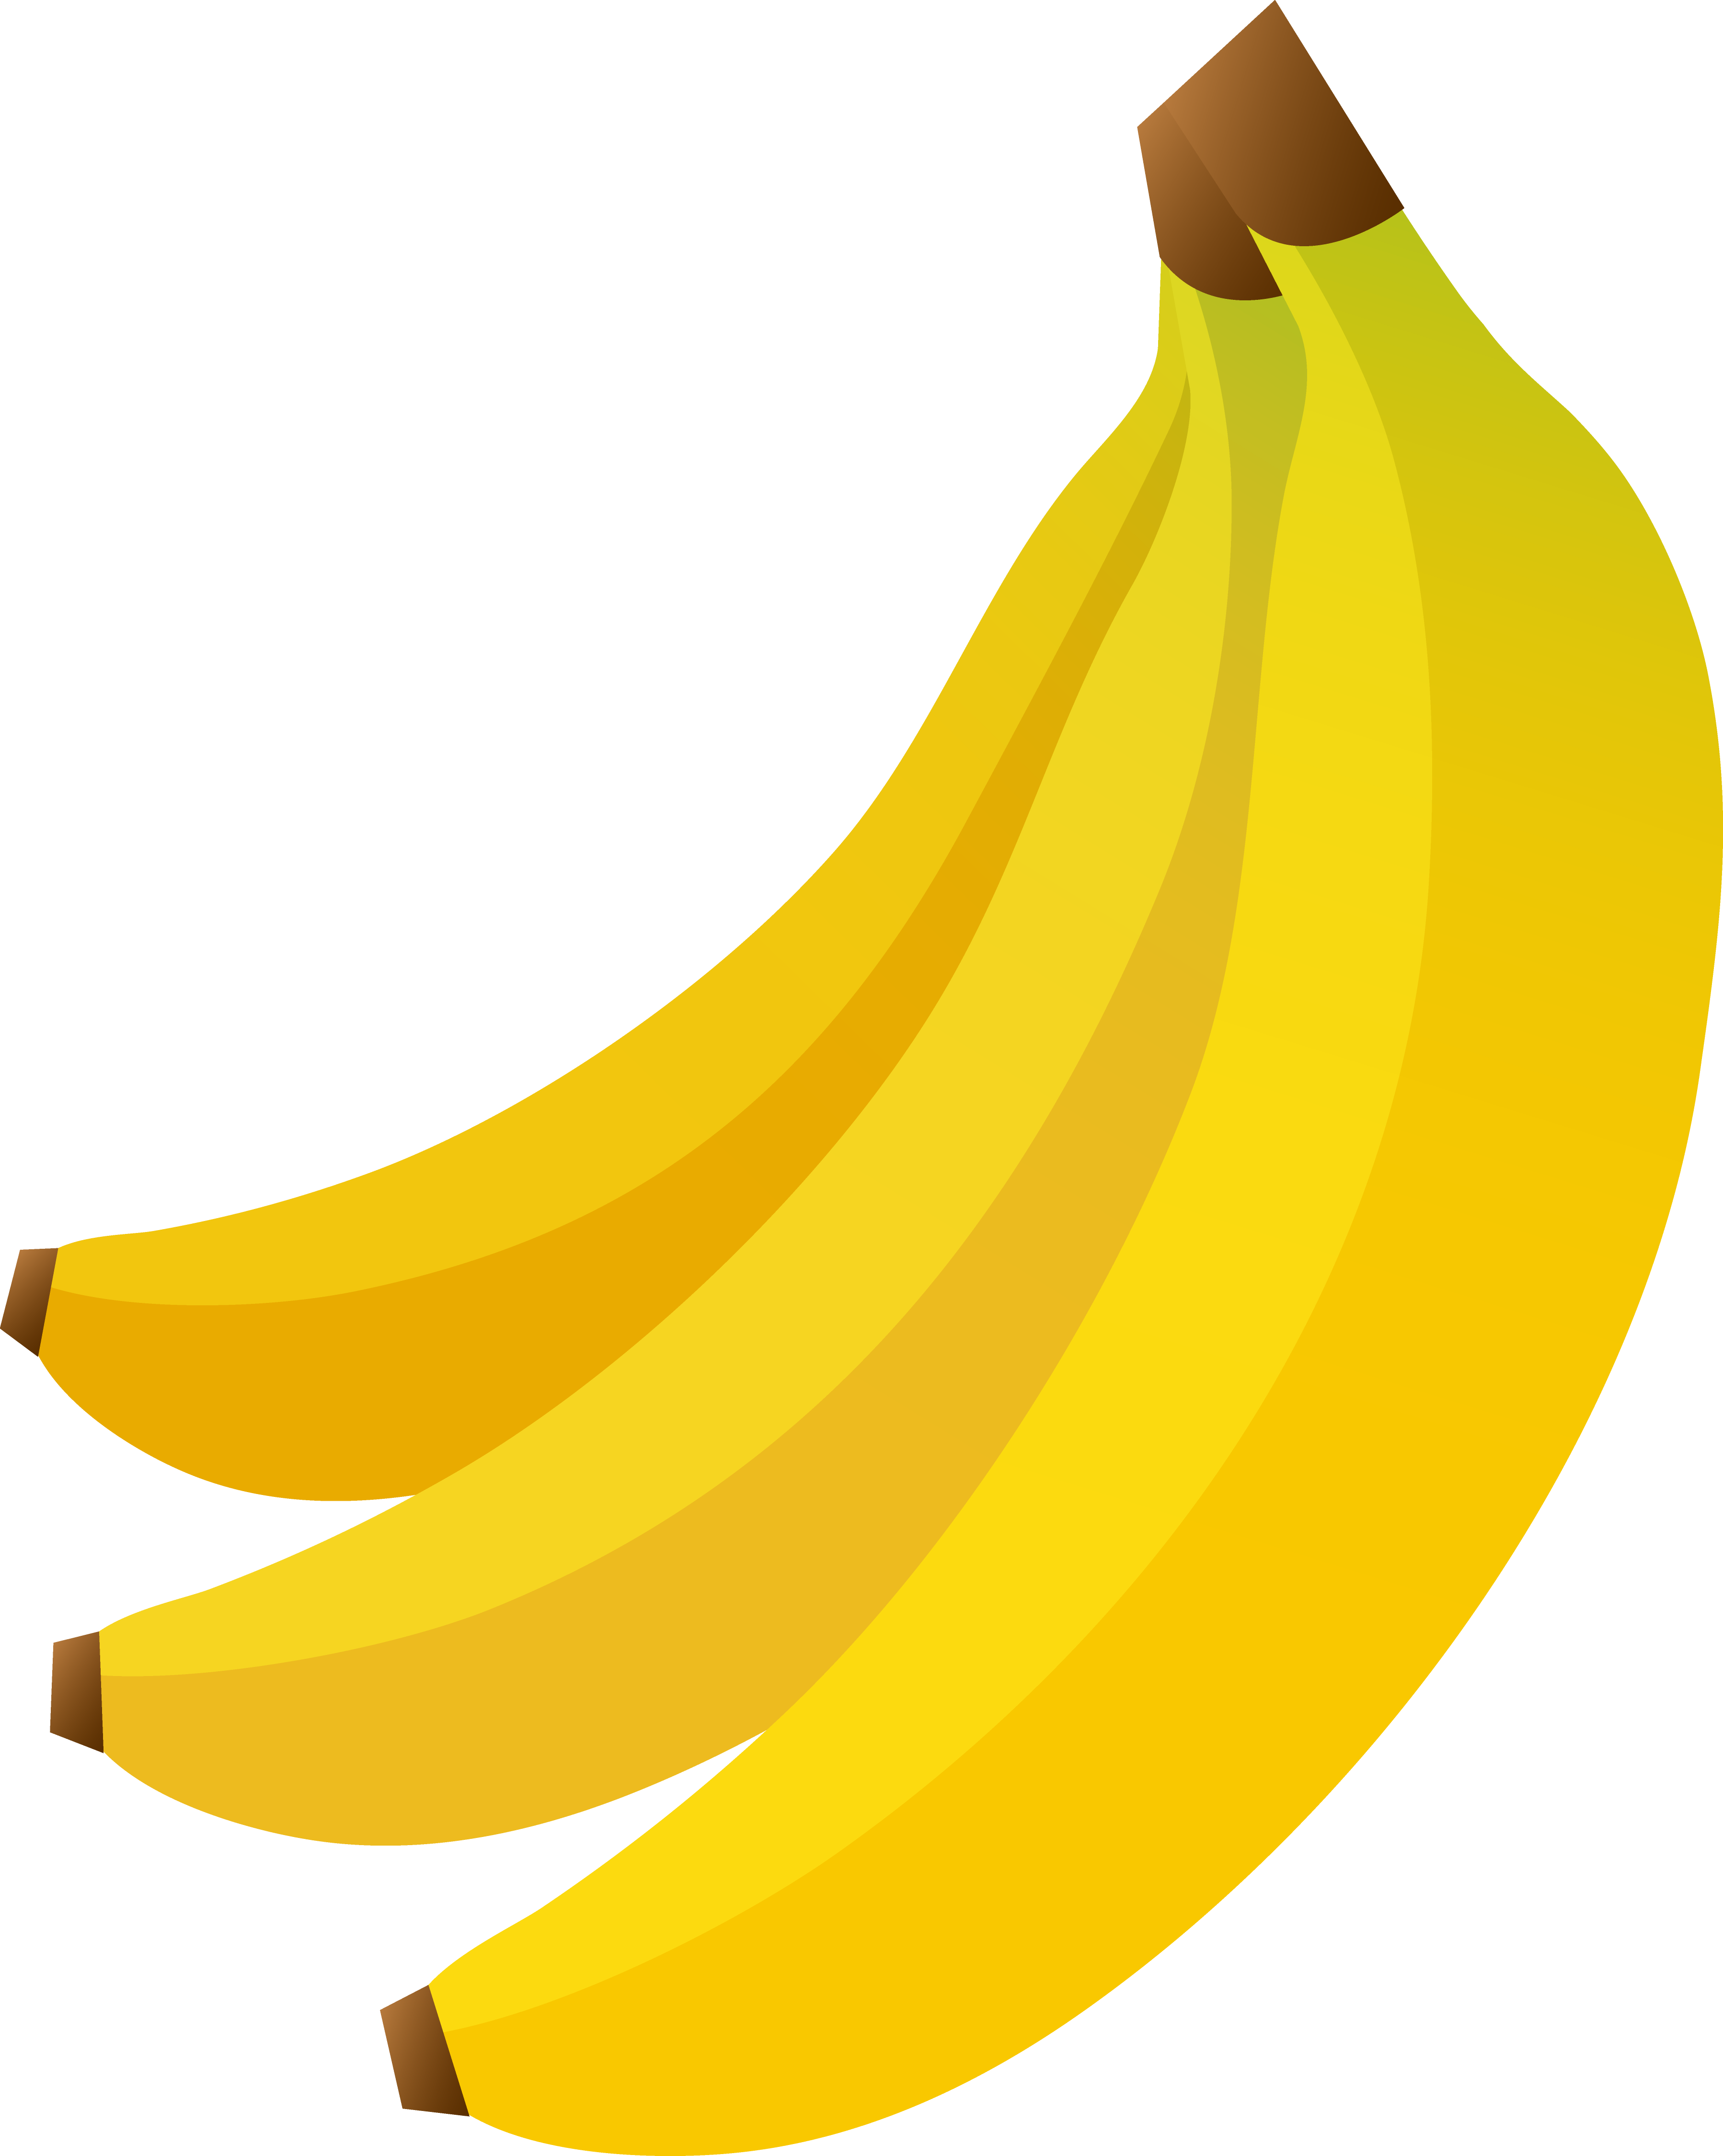 Cartoon Pictures Of Bananas - Cliparts.co